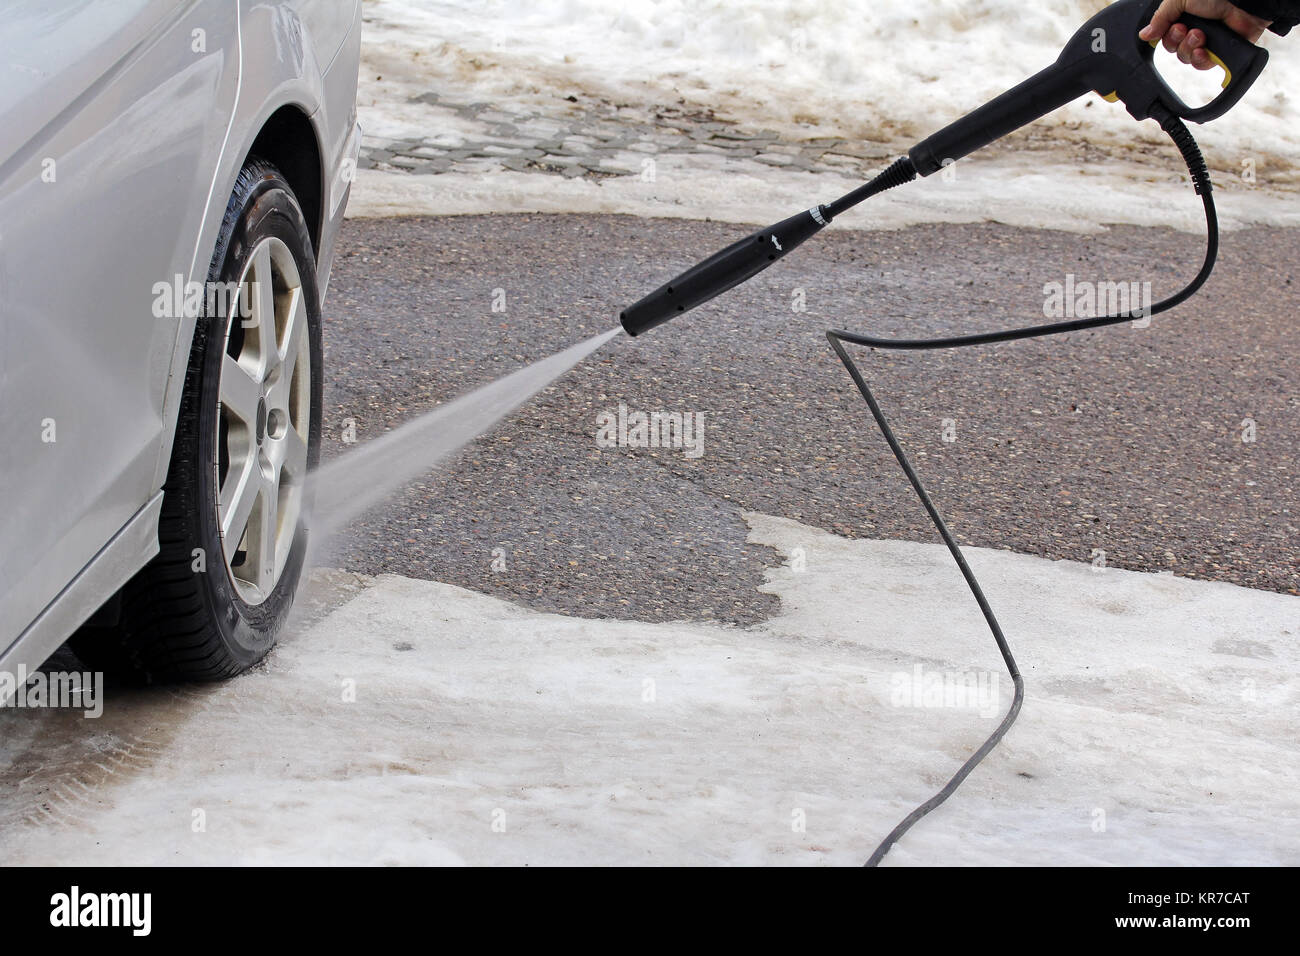 car wash in winter - a man washes his car Stock Photo